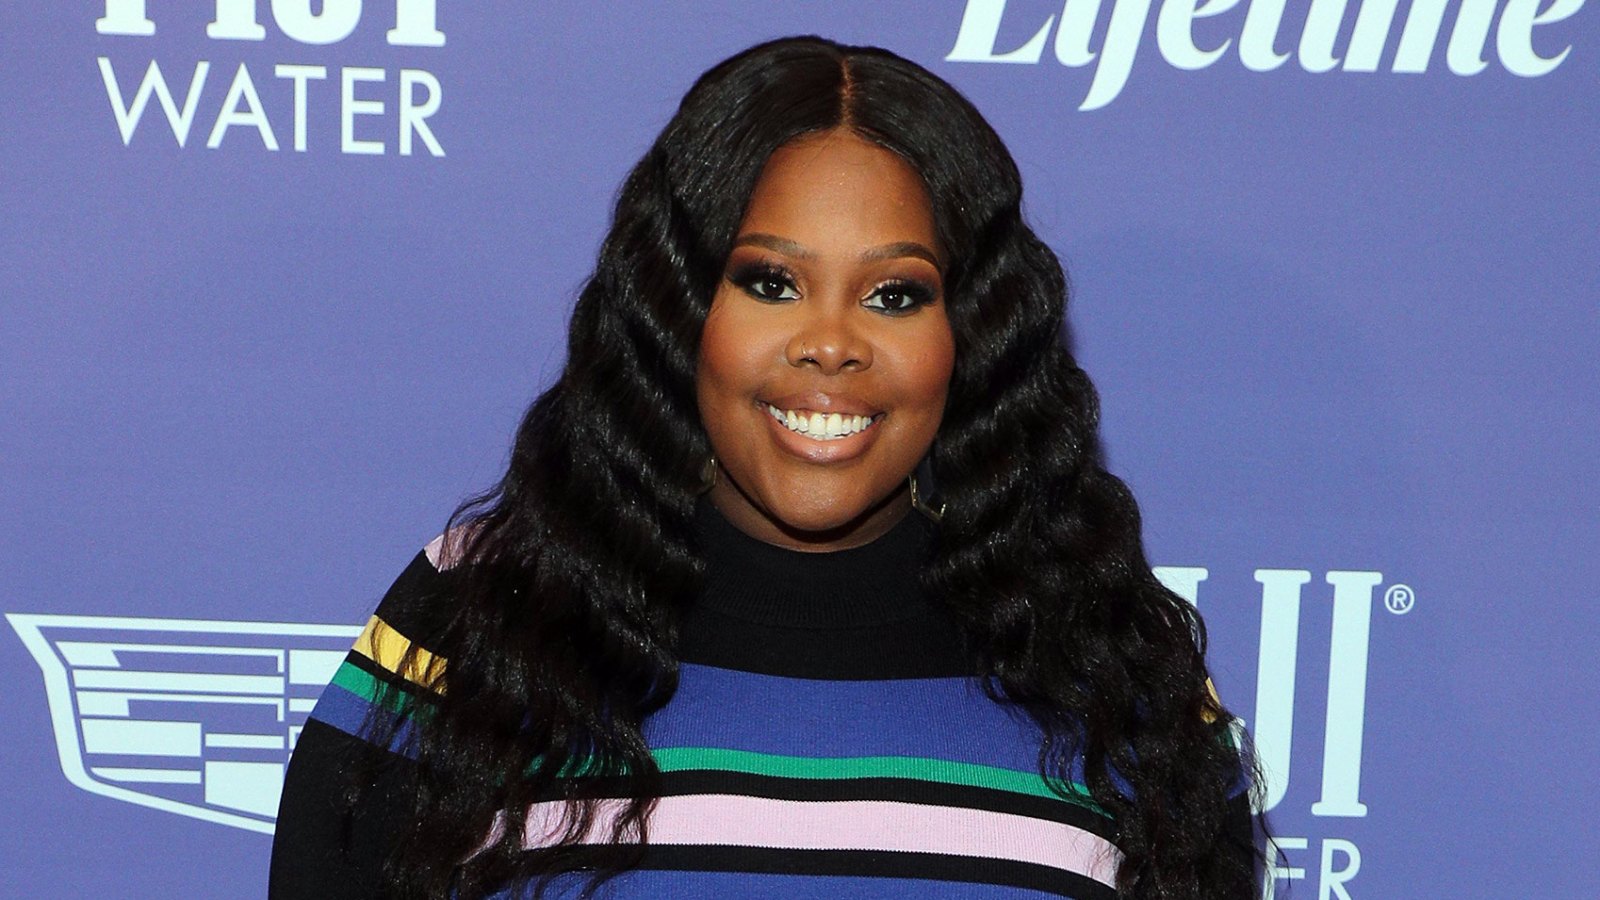 Amber Riley Urges Fans to Stop Calling Her by Glee Character Name